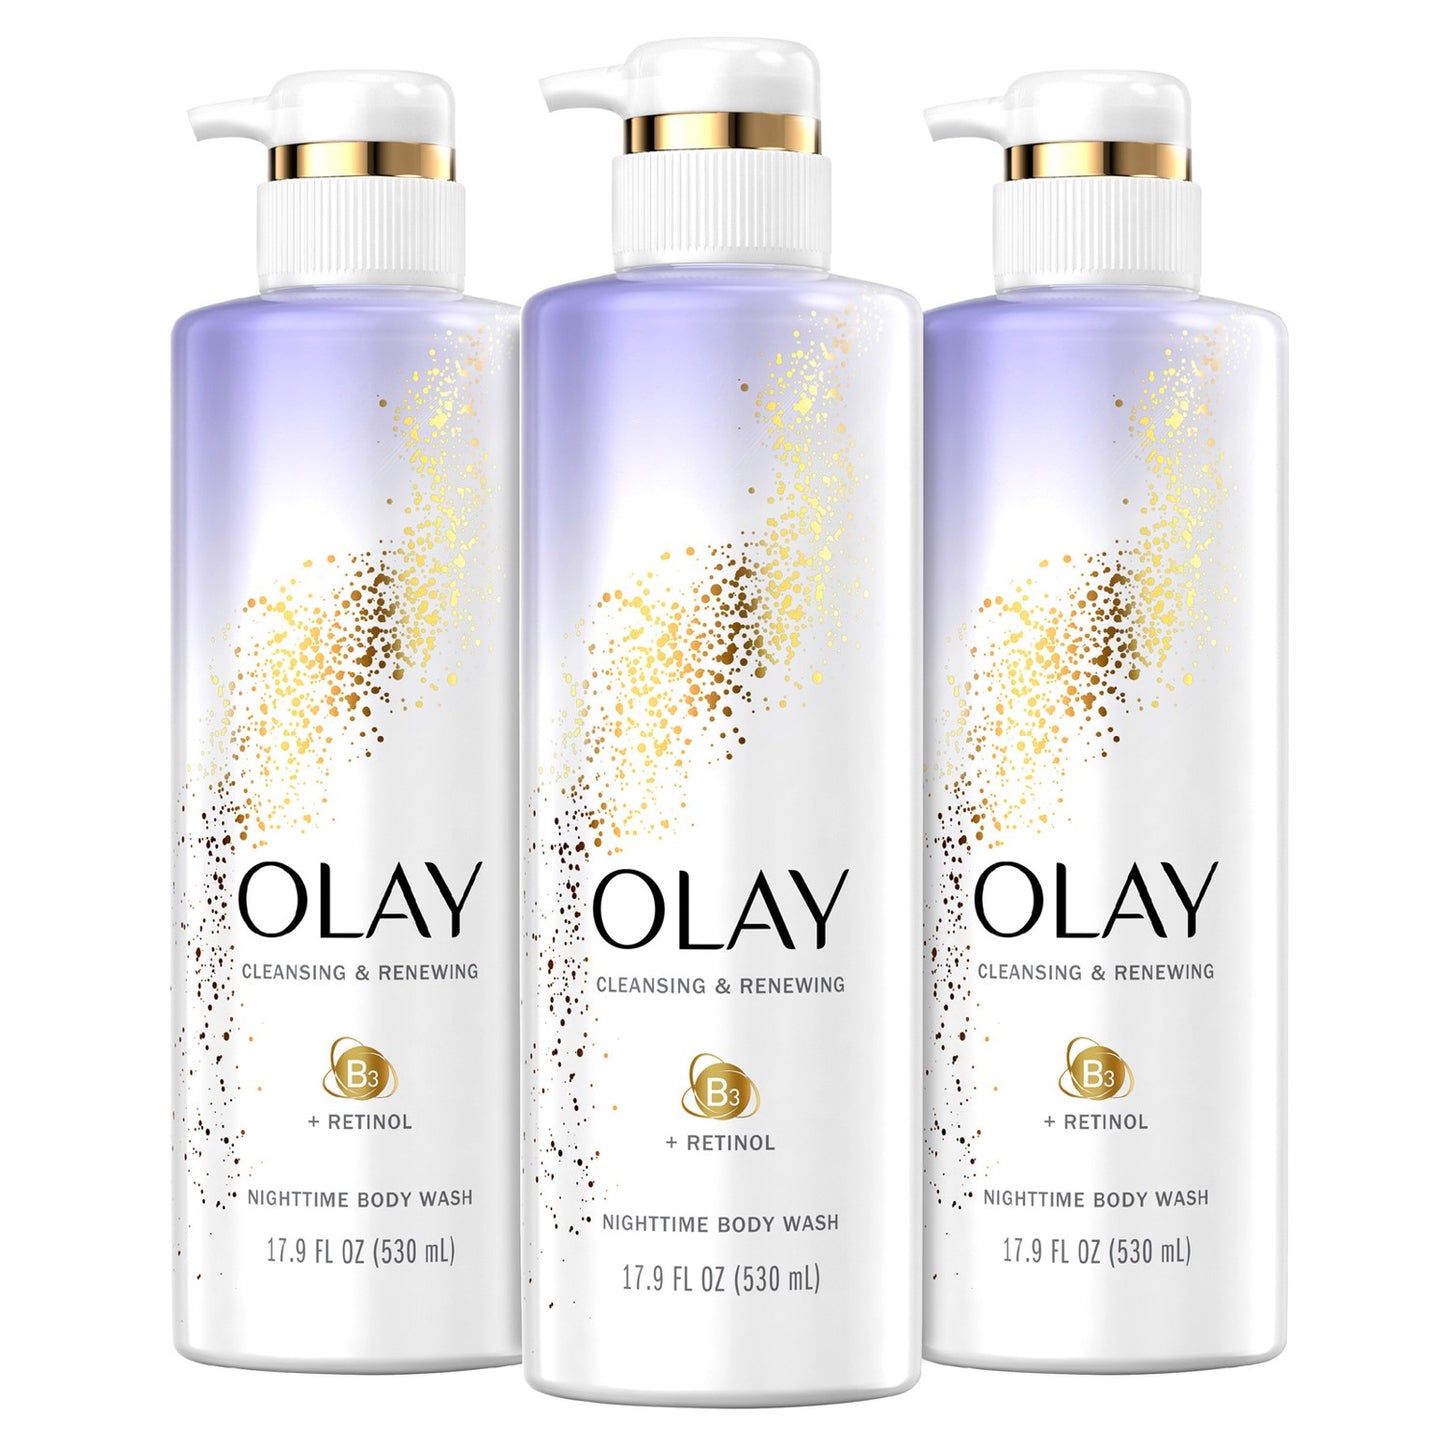 Olay Body Wash with Retinol, Cleansing & Renewing 17.9 oz - 3 Pack